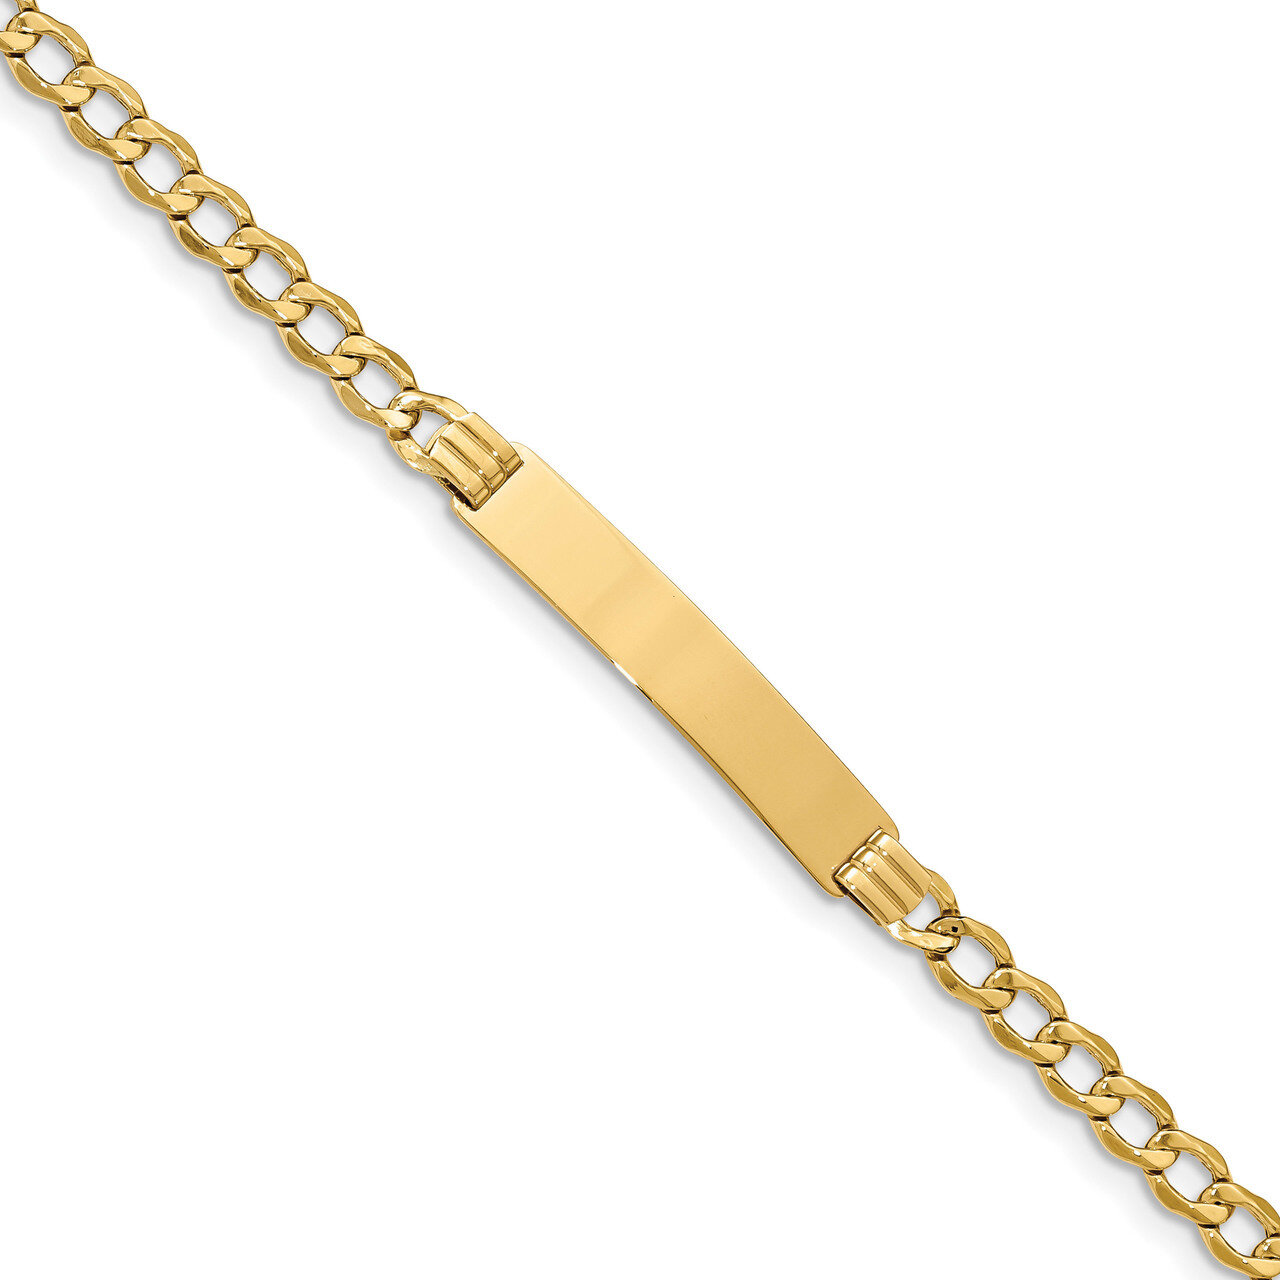 7 Inch ID with Semi-Solid Cuban Bracelet 14k Gold Polished DCID133-7